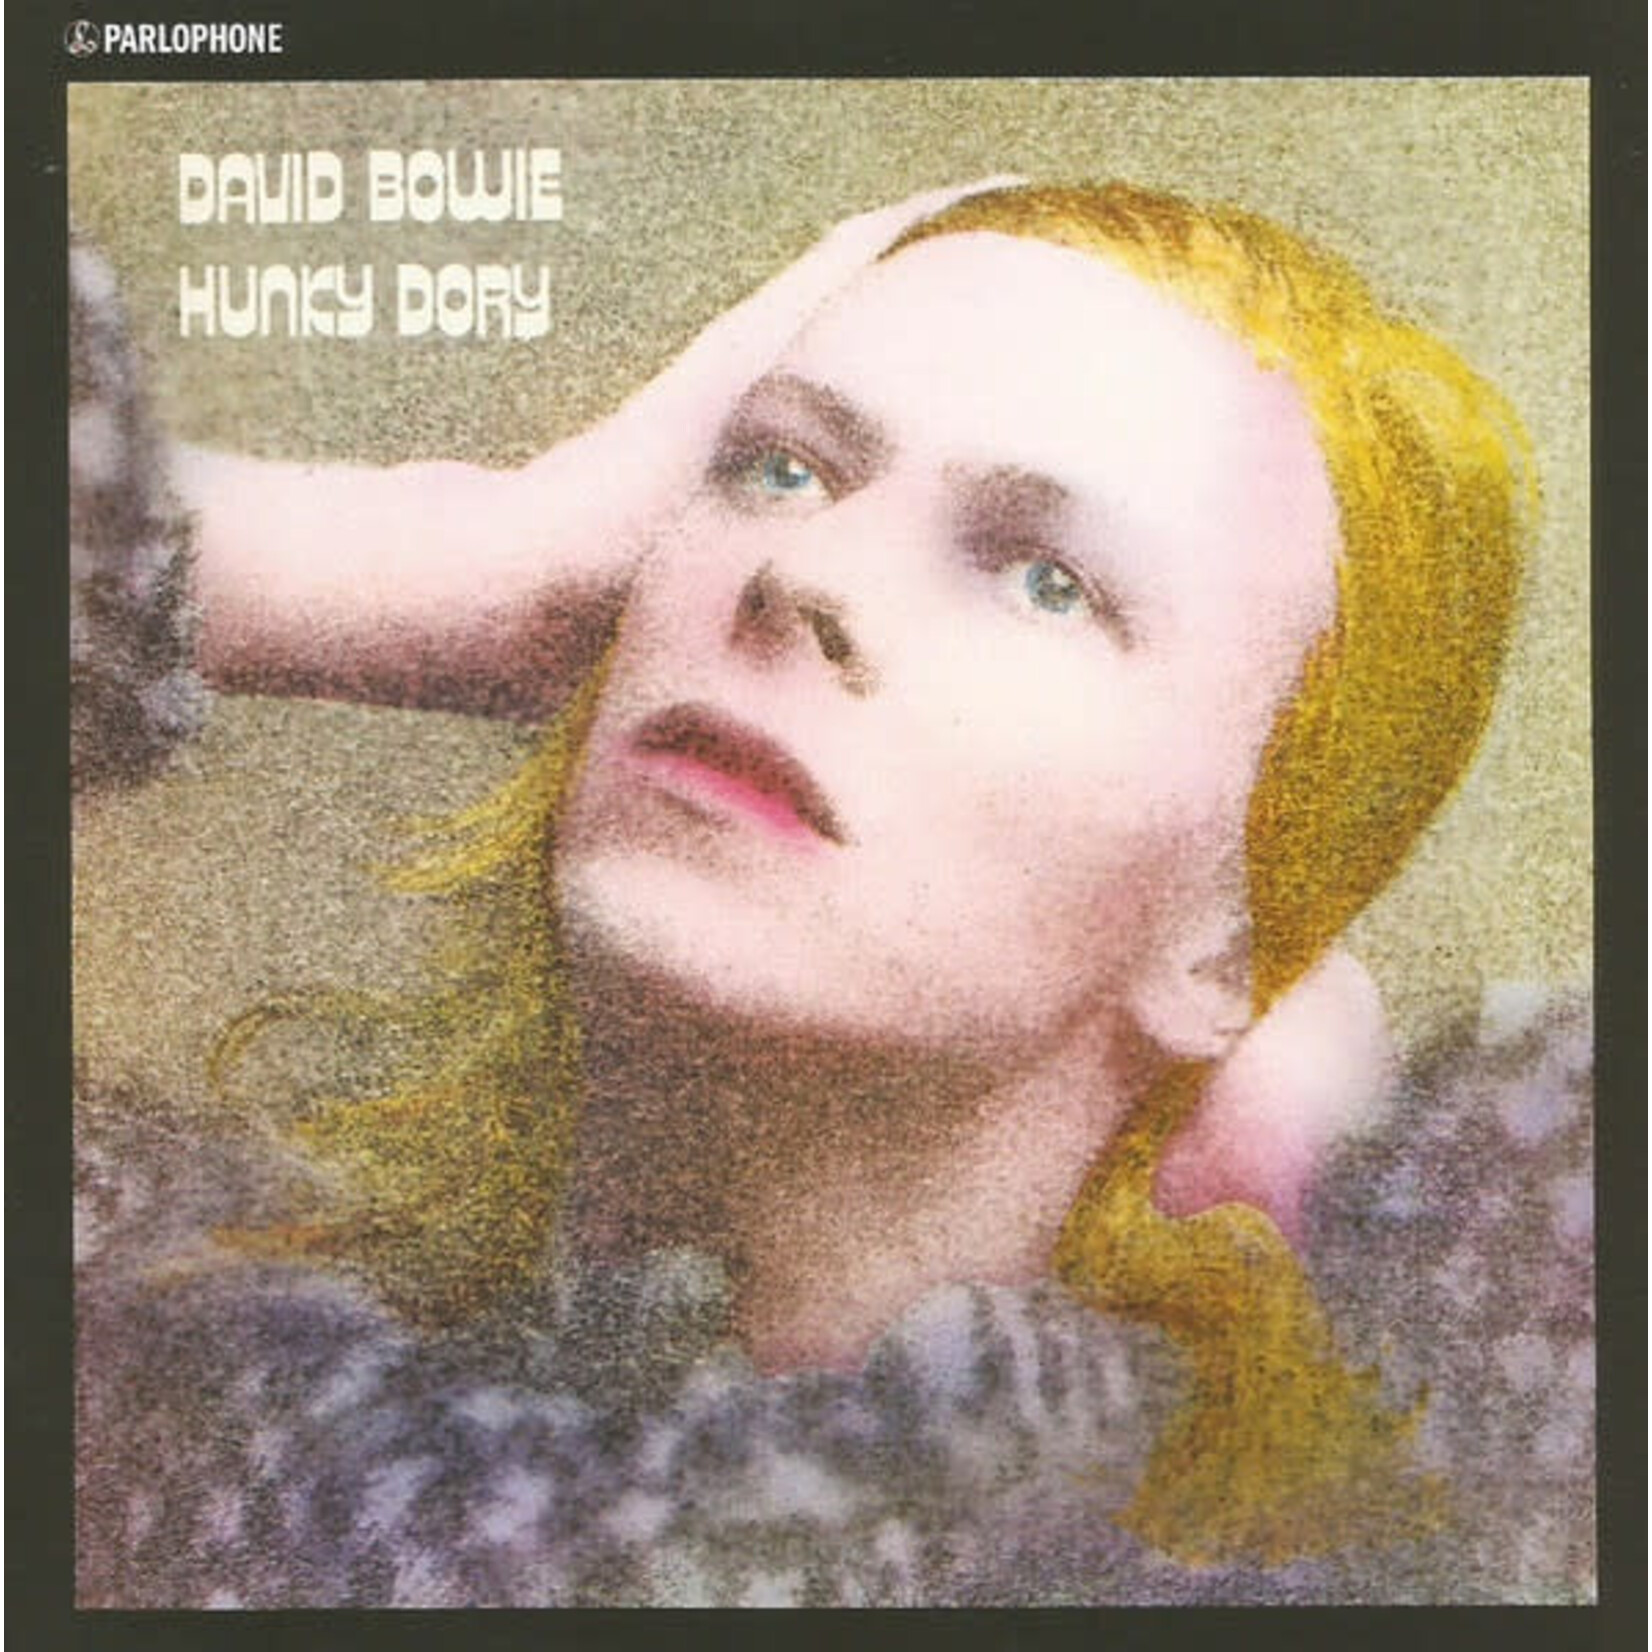 David Bowie David Bowie – Hunky Dory (New, LP, Parlophone – DB69733, 2016 Remaster, 180g)